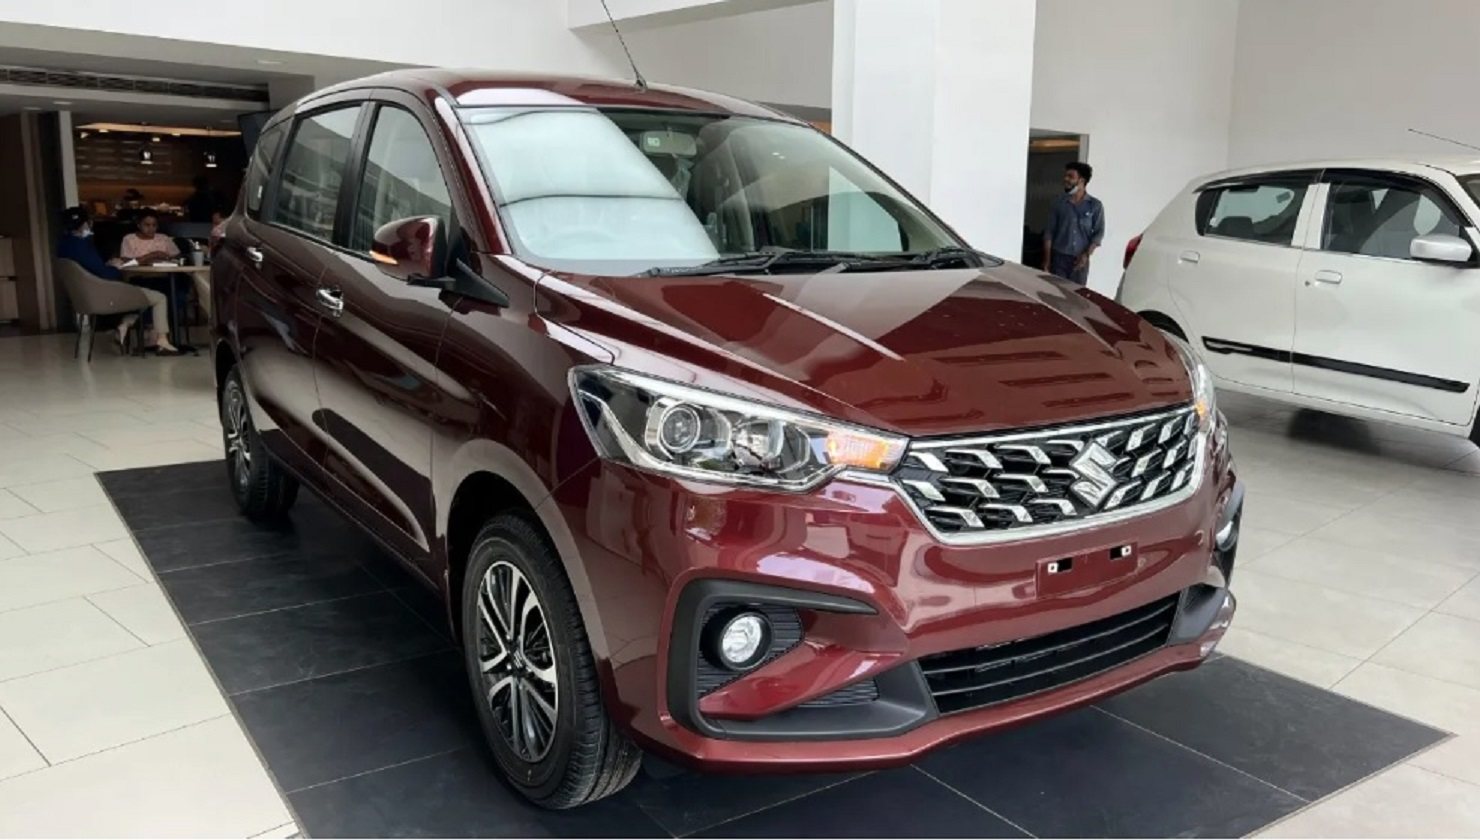 More MPV models priced at 428 million are about to be launched for Vietnamese customers, which have superior advantages over Mitsubishi Xpander